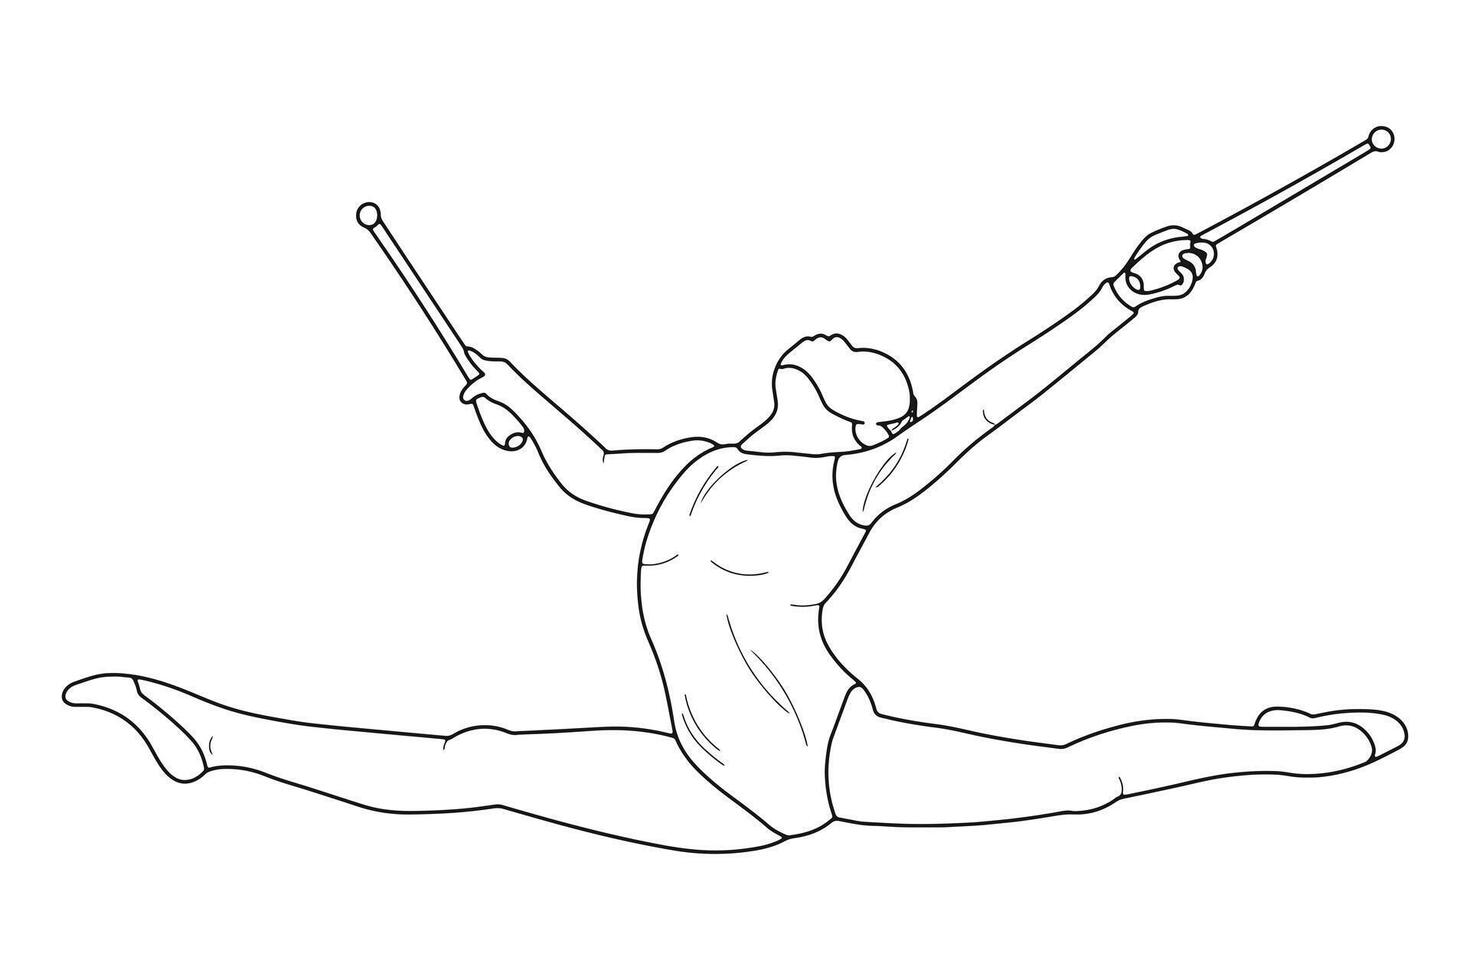 Sketch of silhouette of a gymnast in a vault with gymnastic clubs, isolated vector